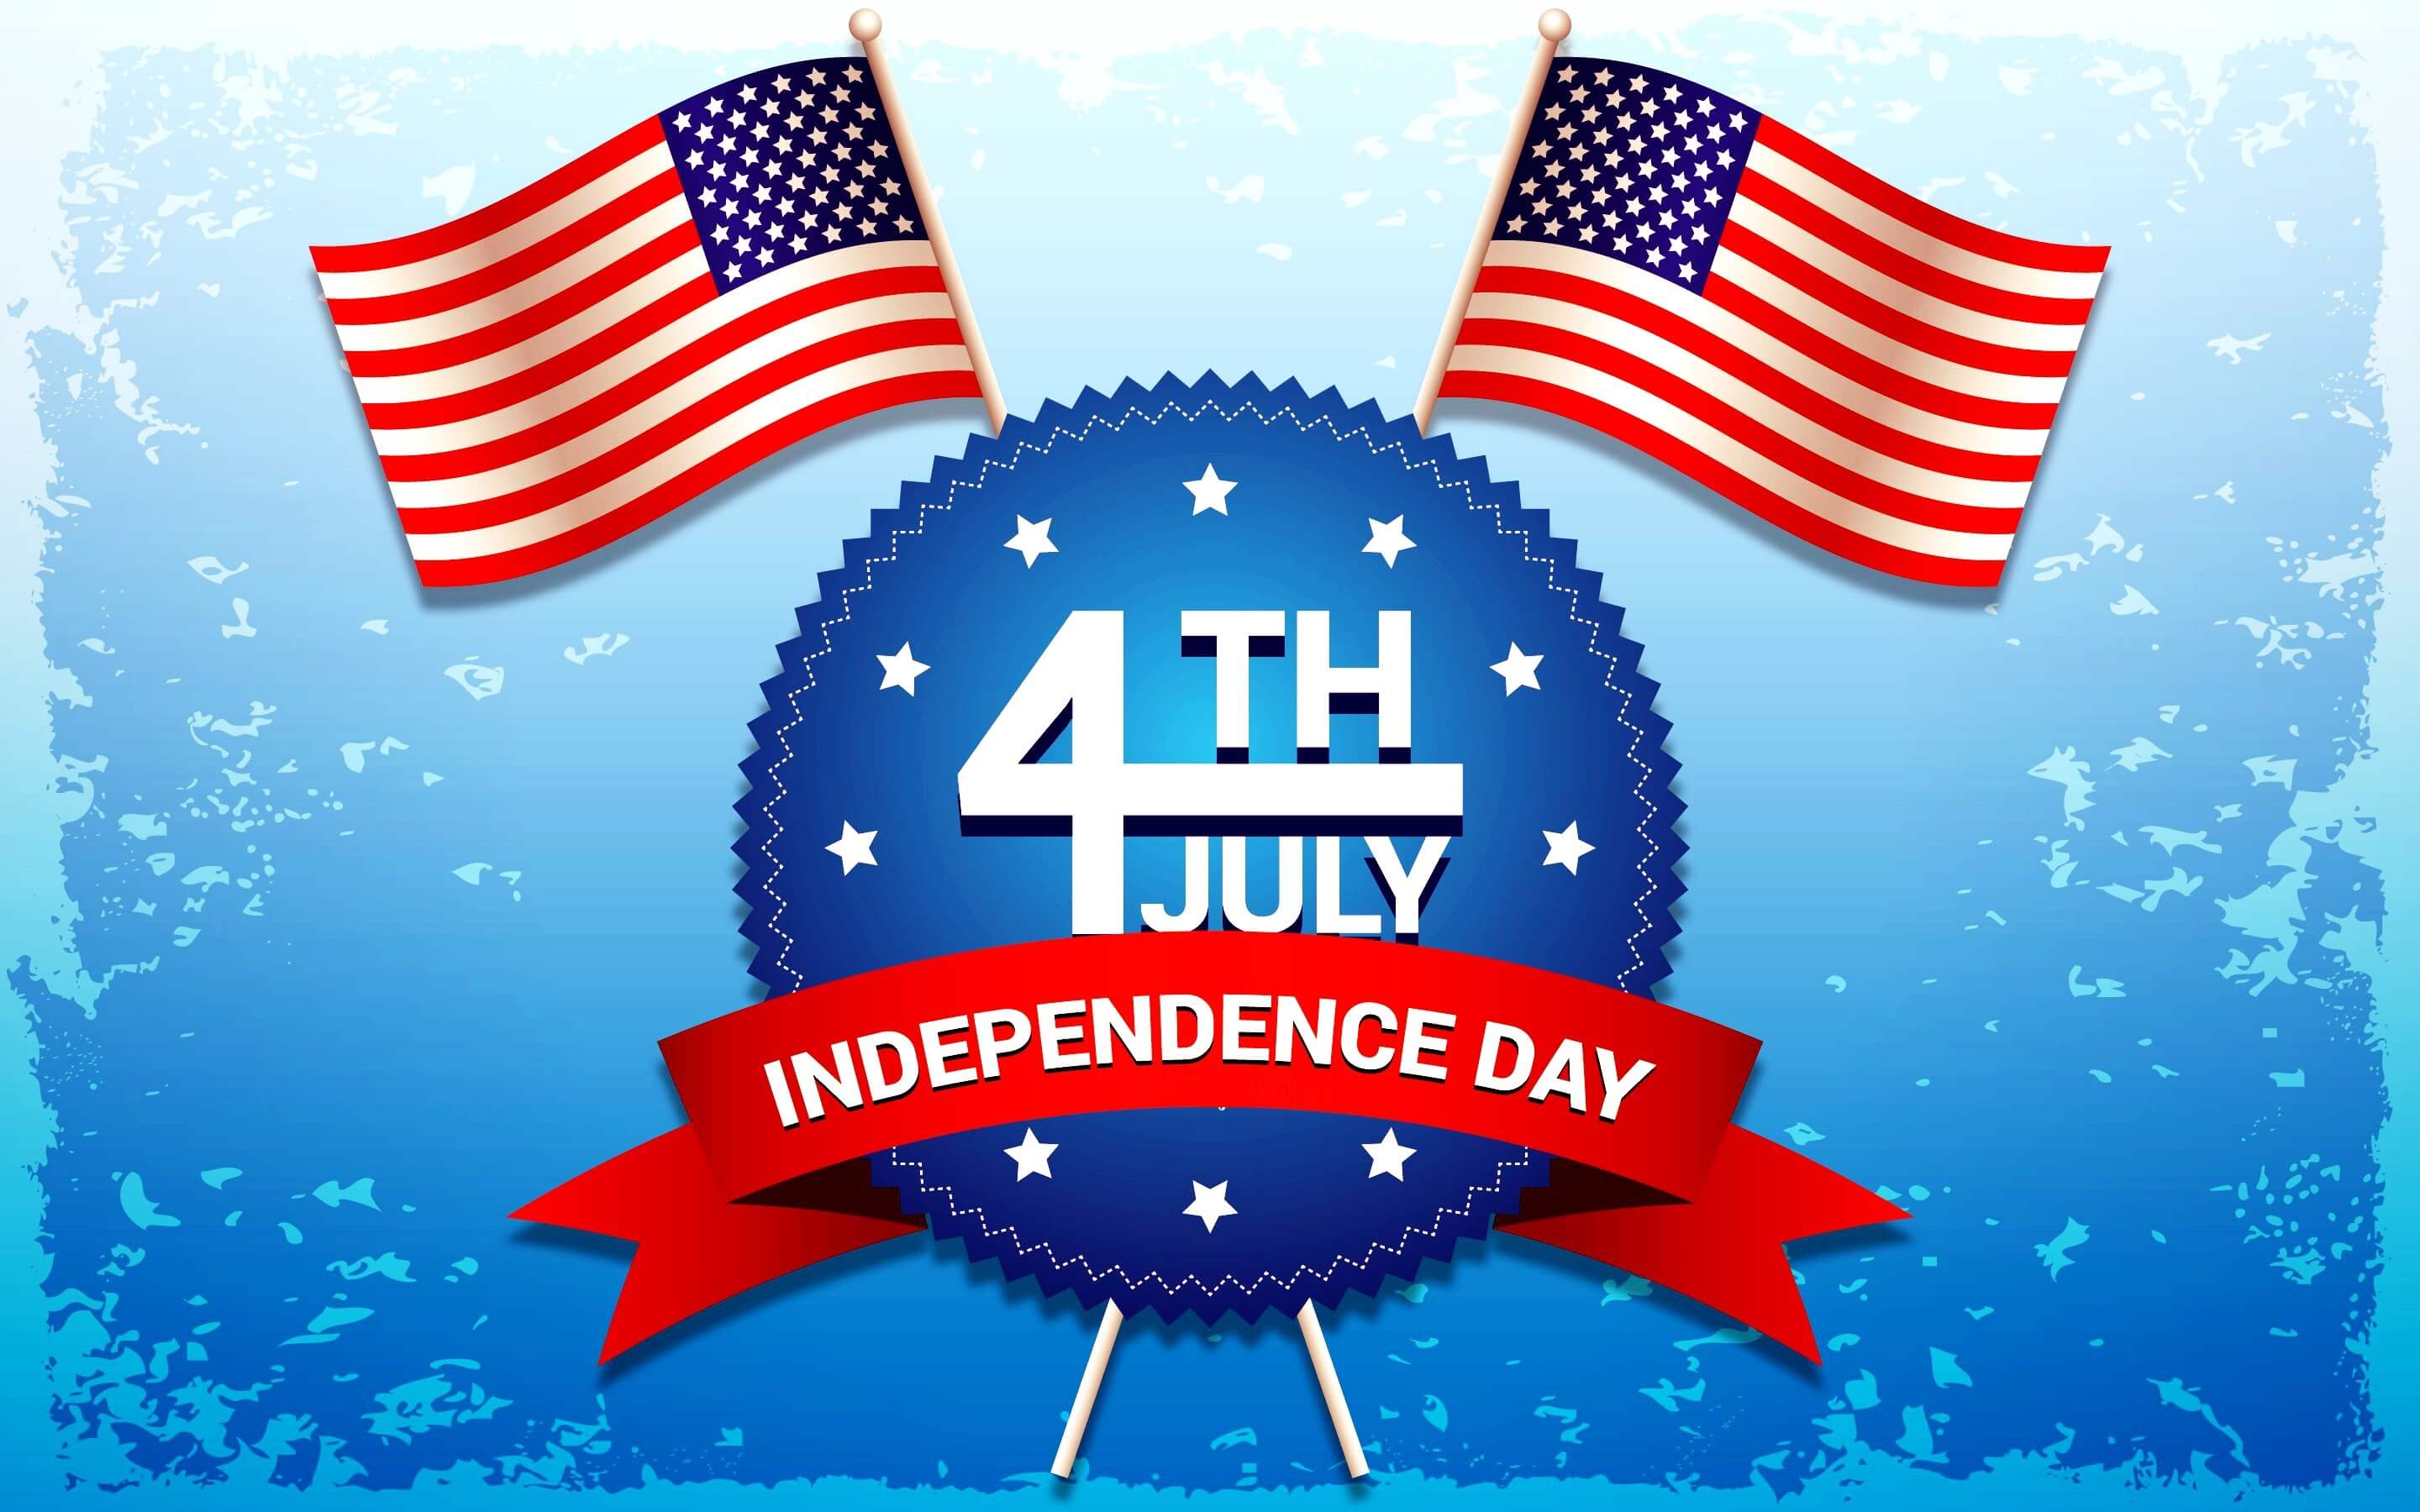 ACEP Office will be Closed for Independence Day Holiday